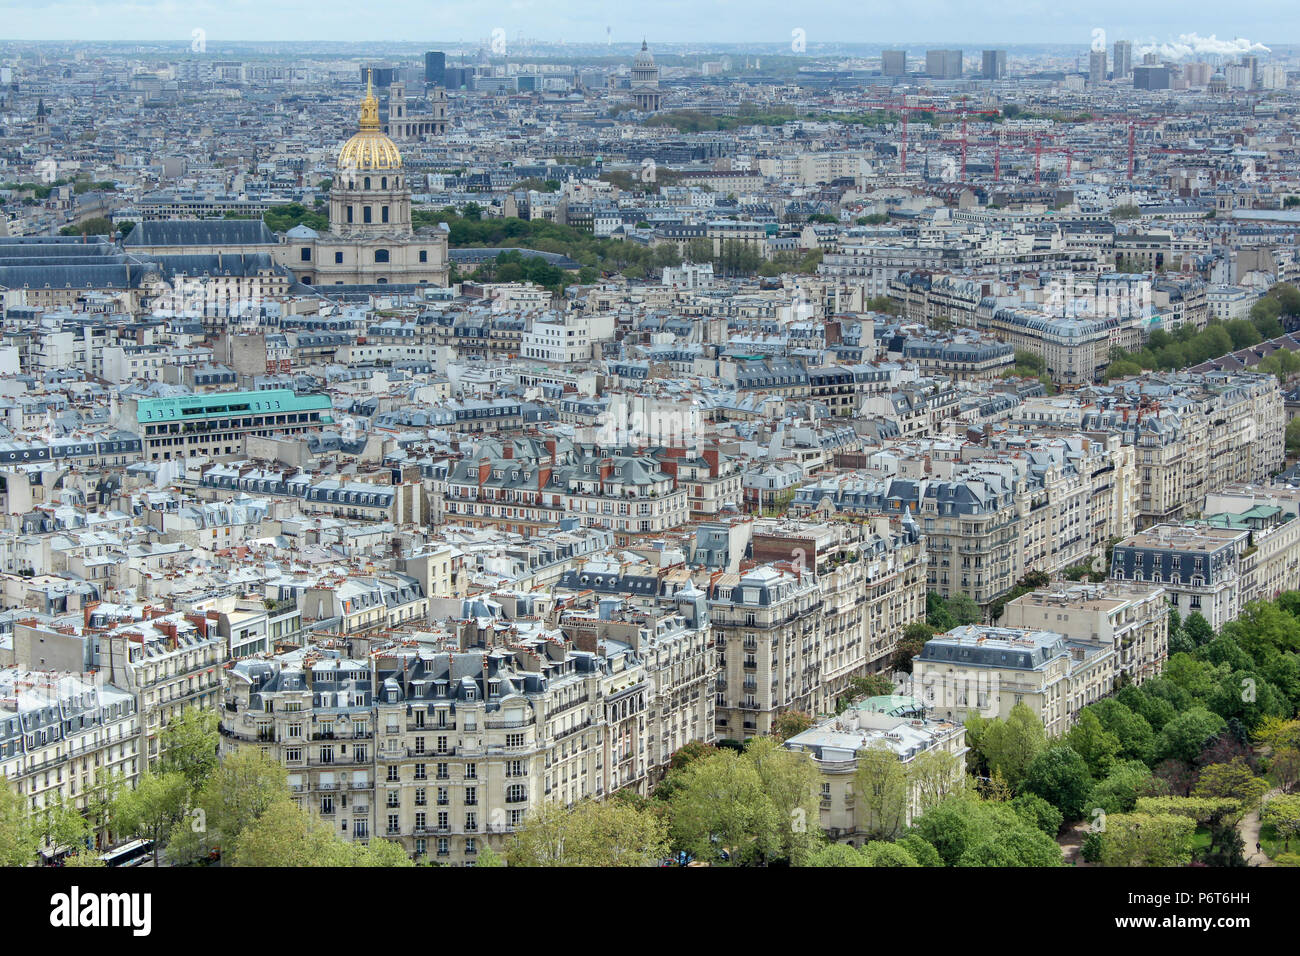 The view of the city of Paris from the Eiffel Tower on a spring day Stock Photo